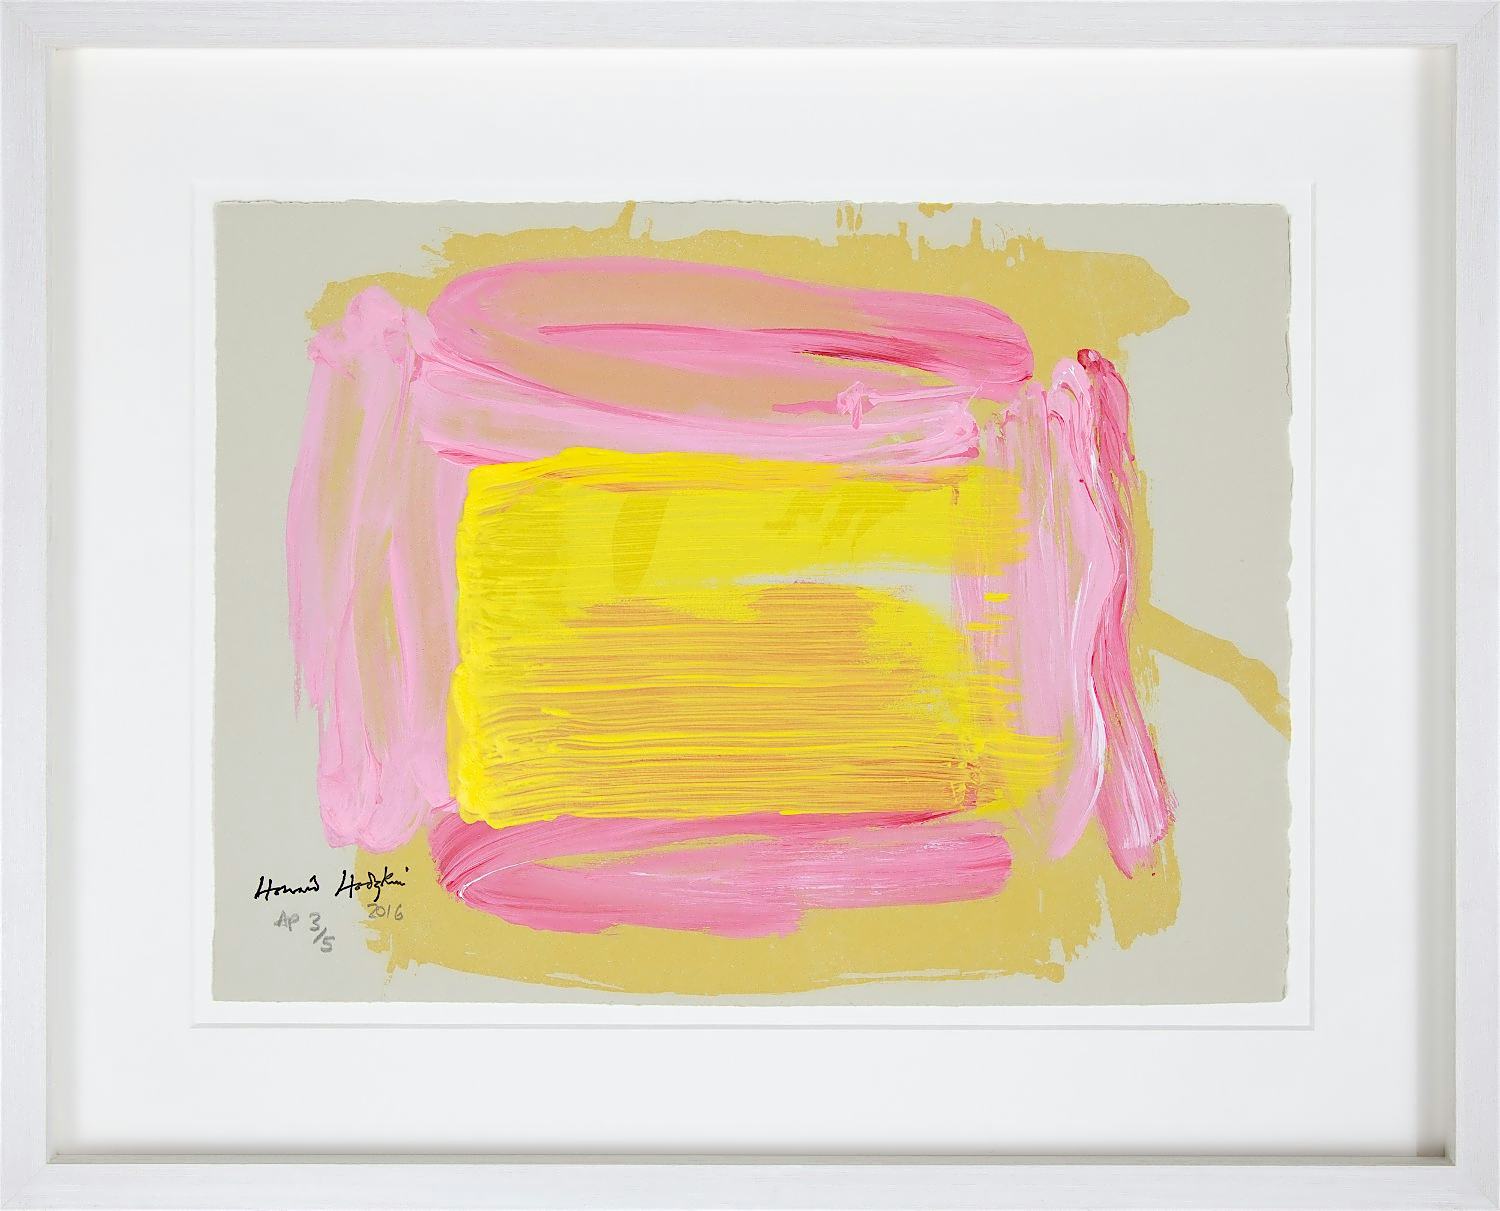 A Pale Reflection by Sir Howard Hodgkin